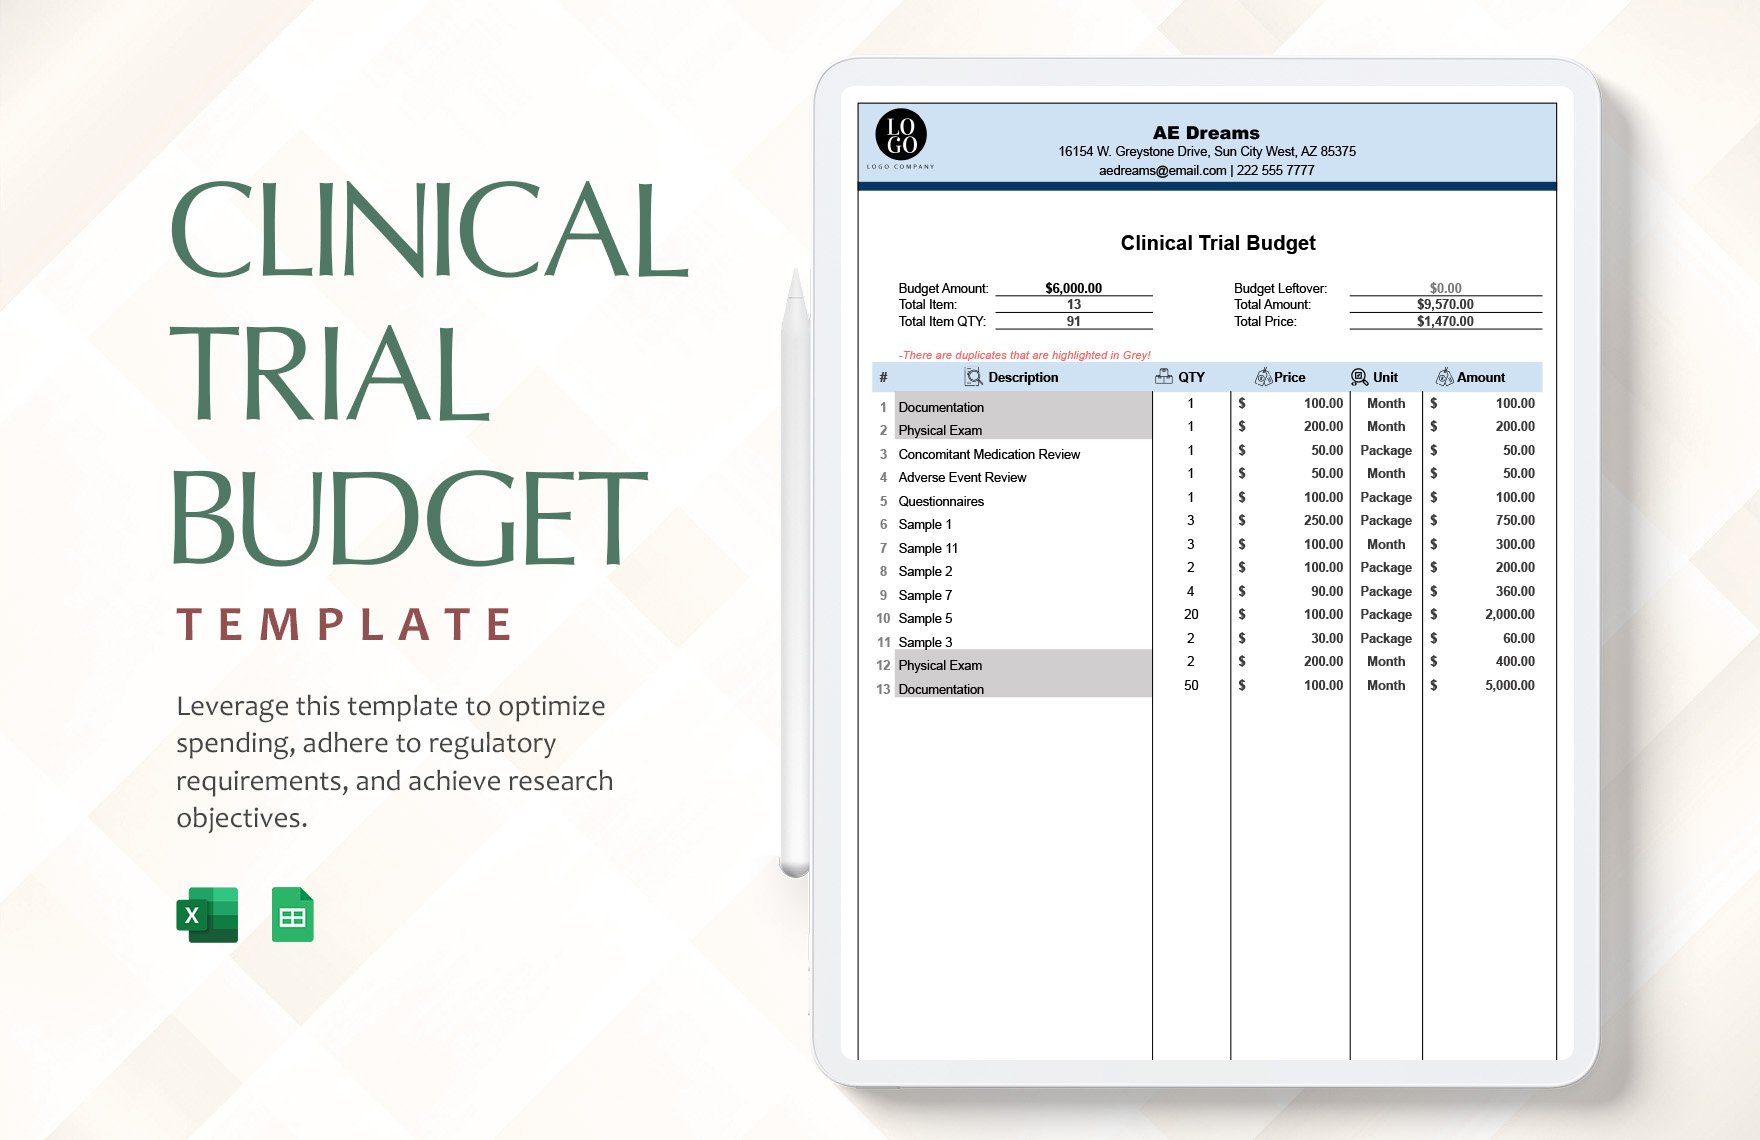 Clinical Trial Budget Template in MS Excel Google Sheets Download